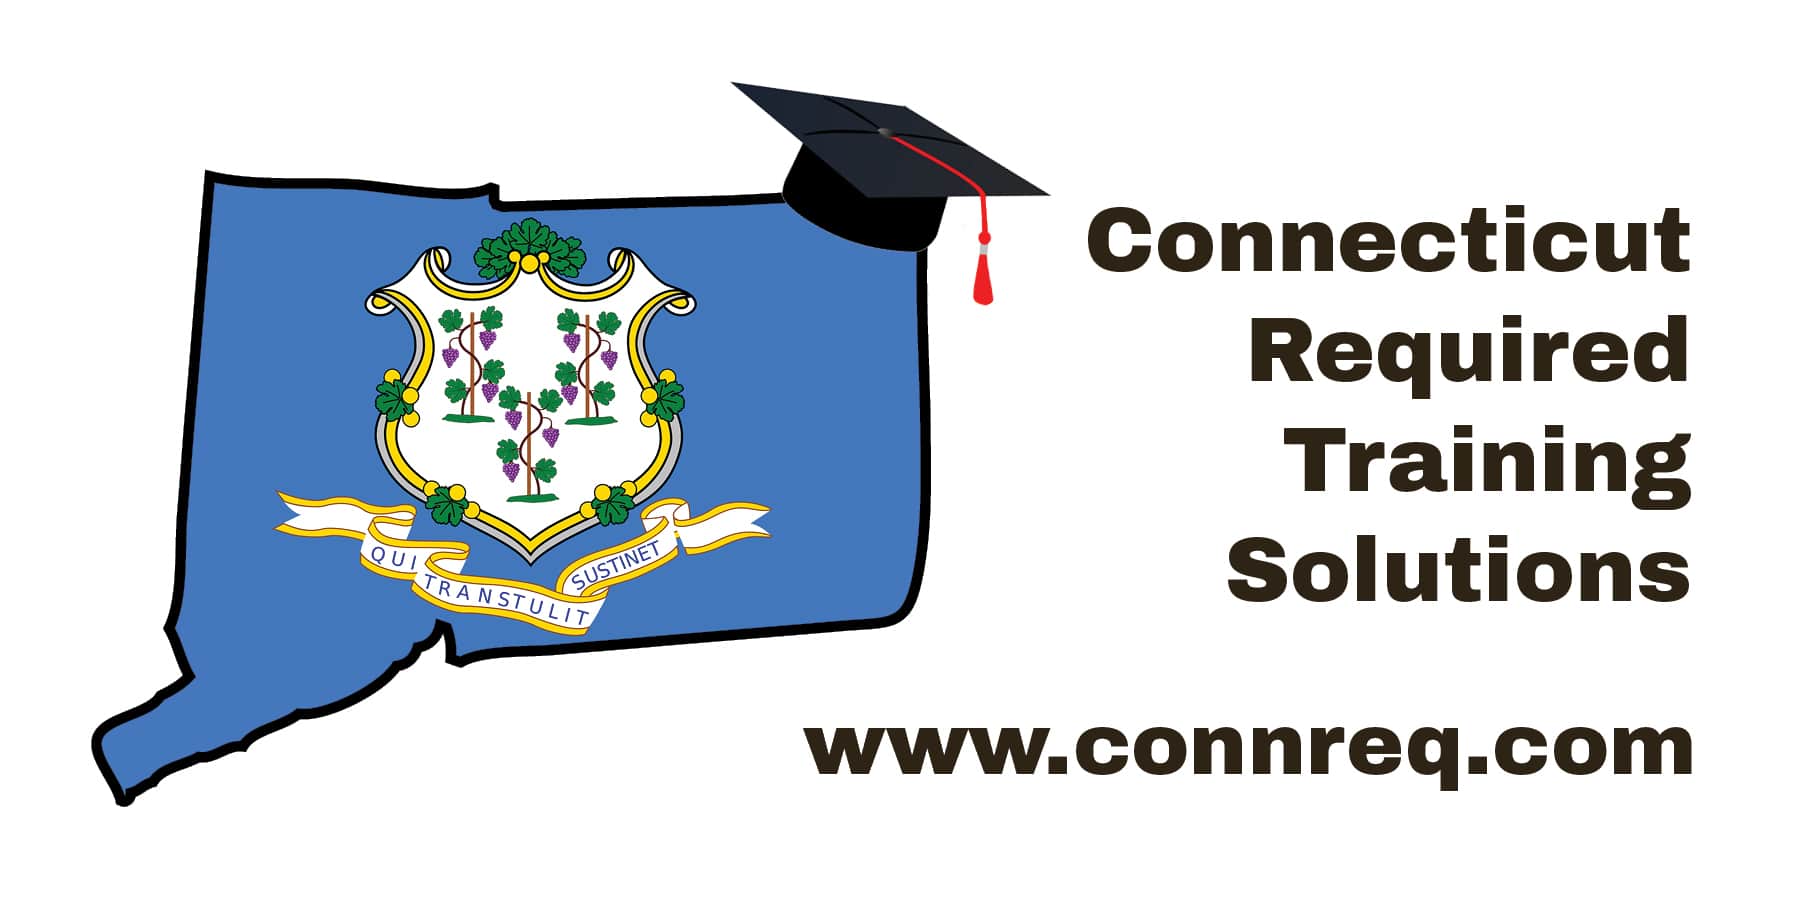 Connecticut Required Training Solutions